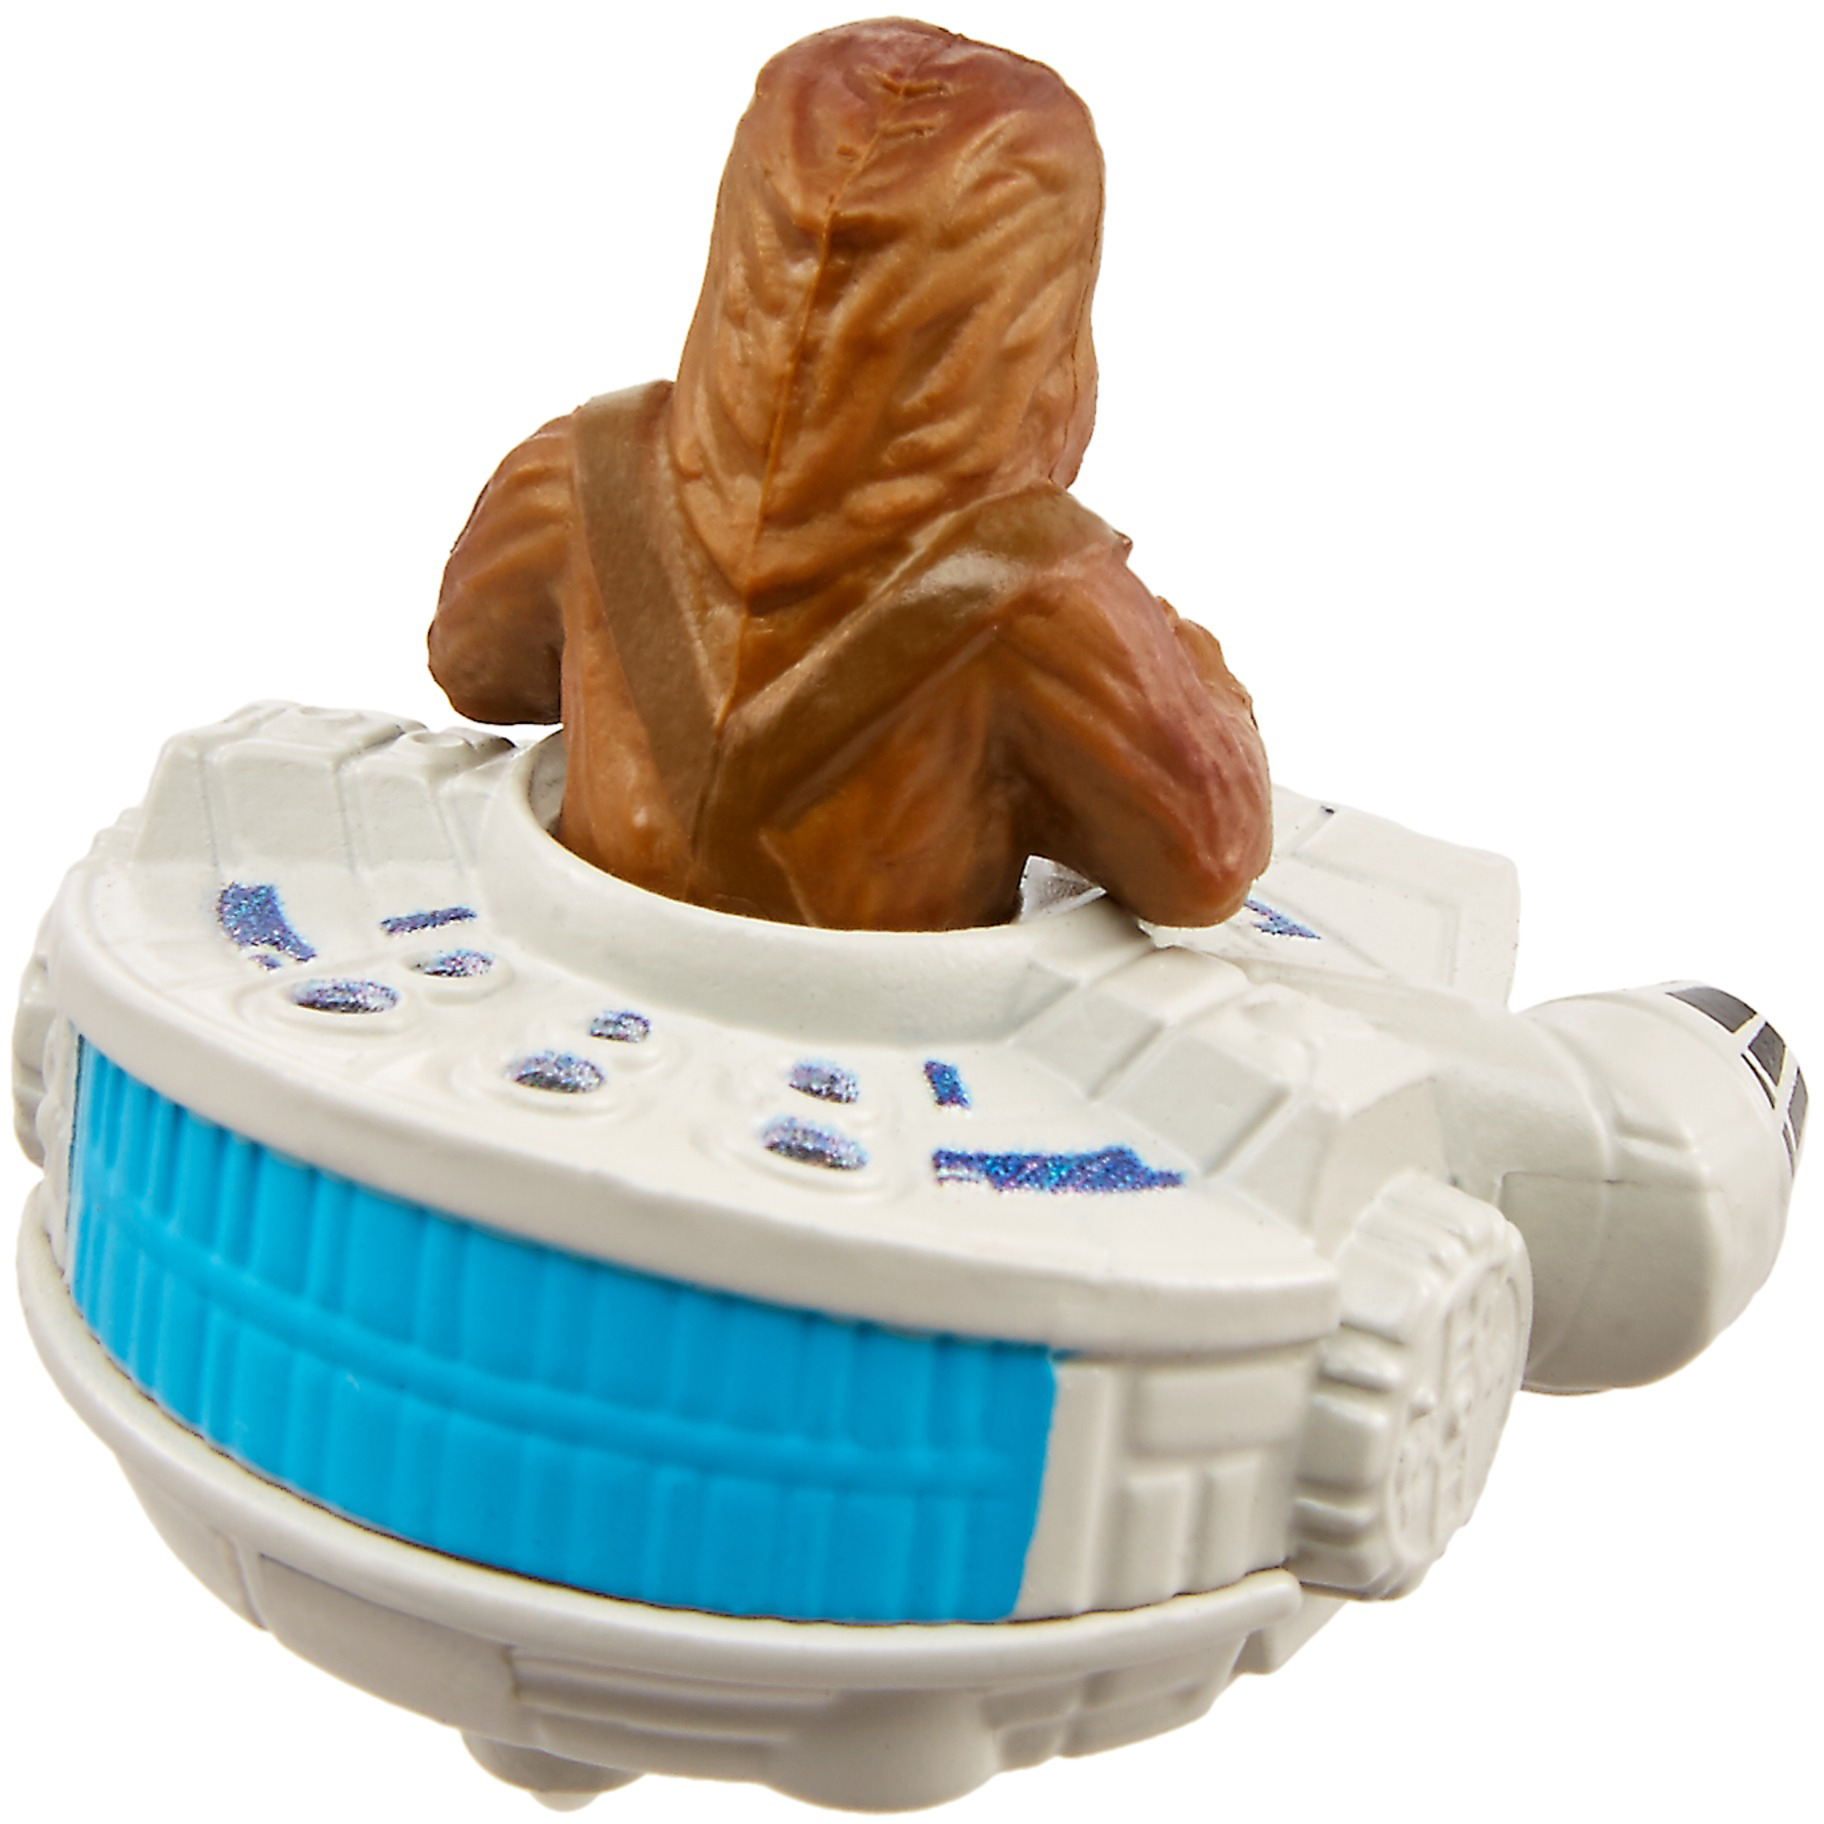 Solo: ASWS HW Chewbacca Battle Roller Toy 4